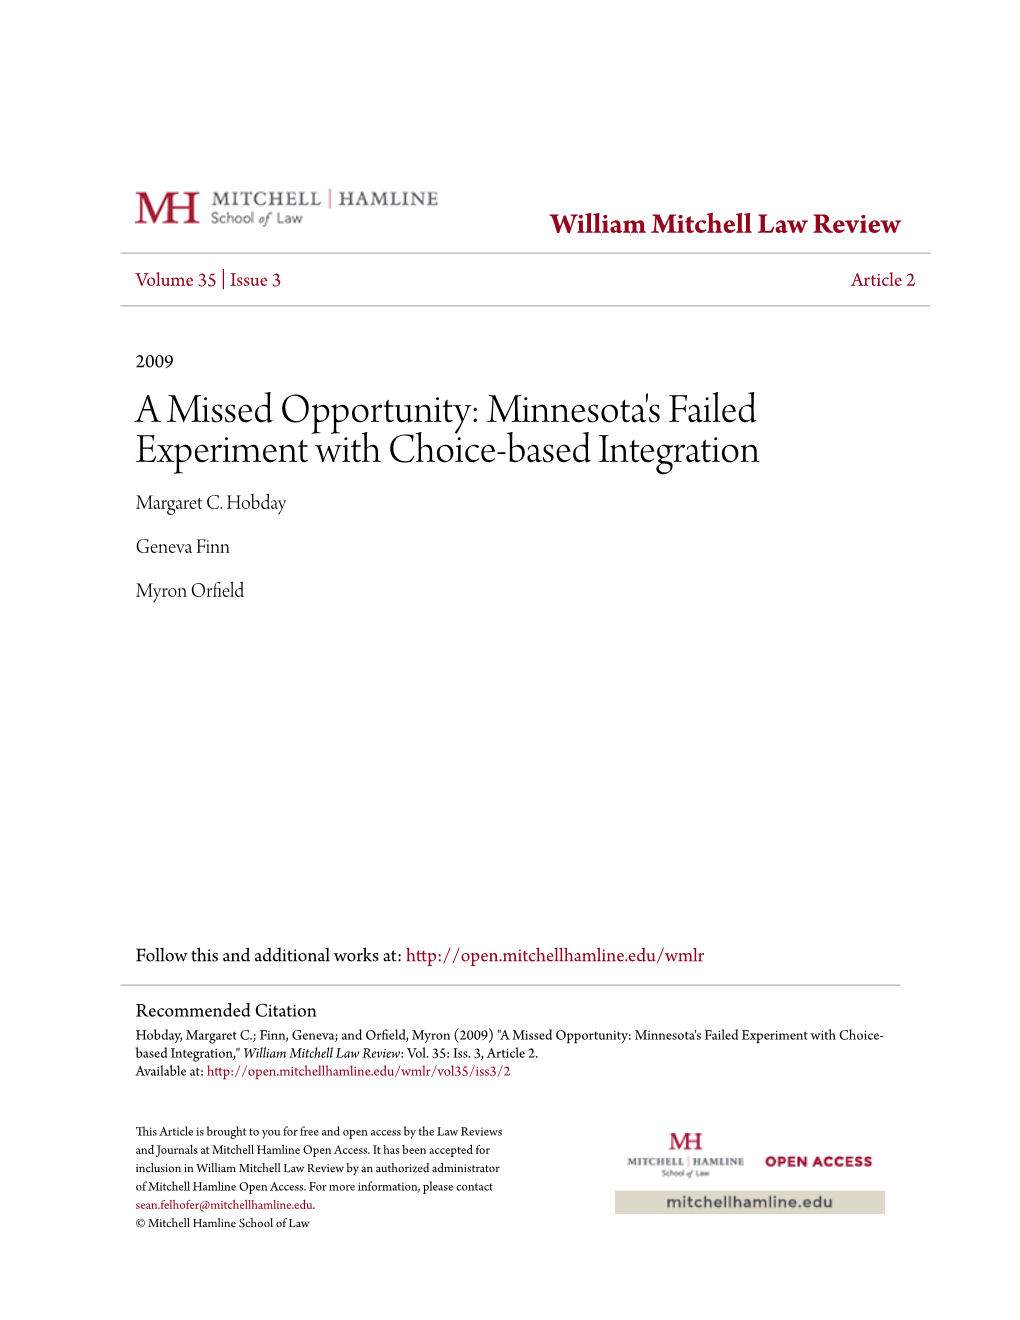 Minnesota's Failed Experiment with Choice-Based Integration Margaret C